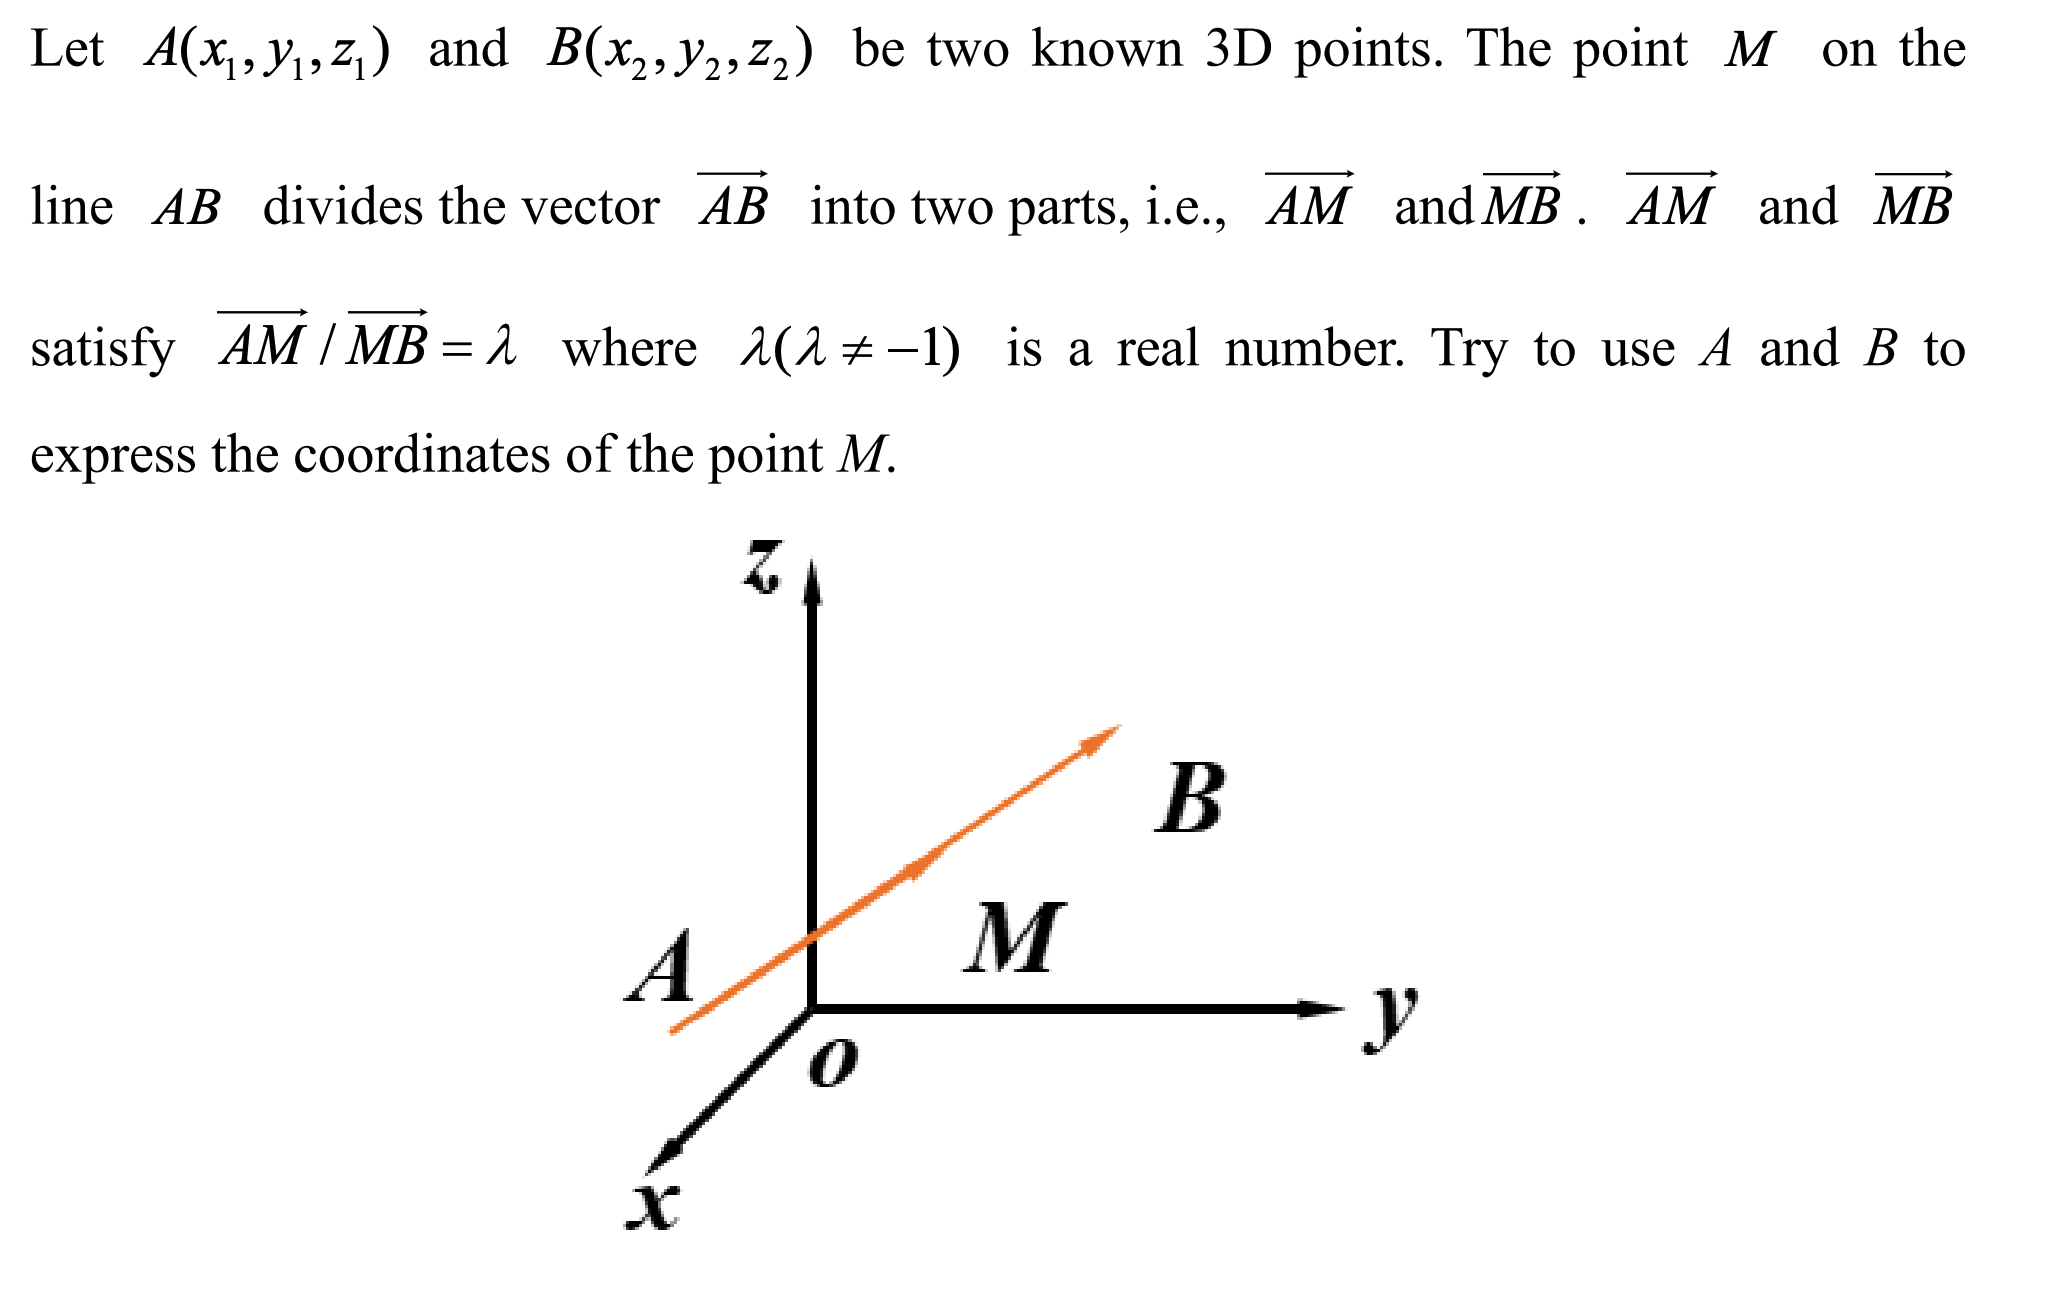 Let A(x,y,,z) and B(x,,y2; z,) be two known 3D points. The point M on the
line AB divides the vector AB into two parts, i.e.., AM and MB . AM and MB
satisfy AM / MB = 1 where (1±-1) is a real number. Try to use A and B to
express the coordinates of the point M.
